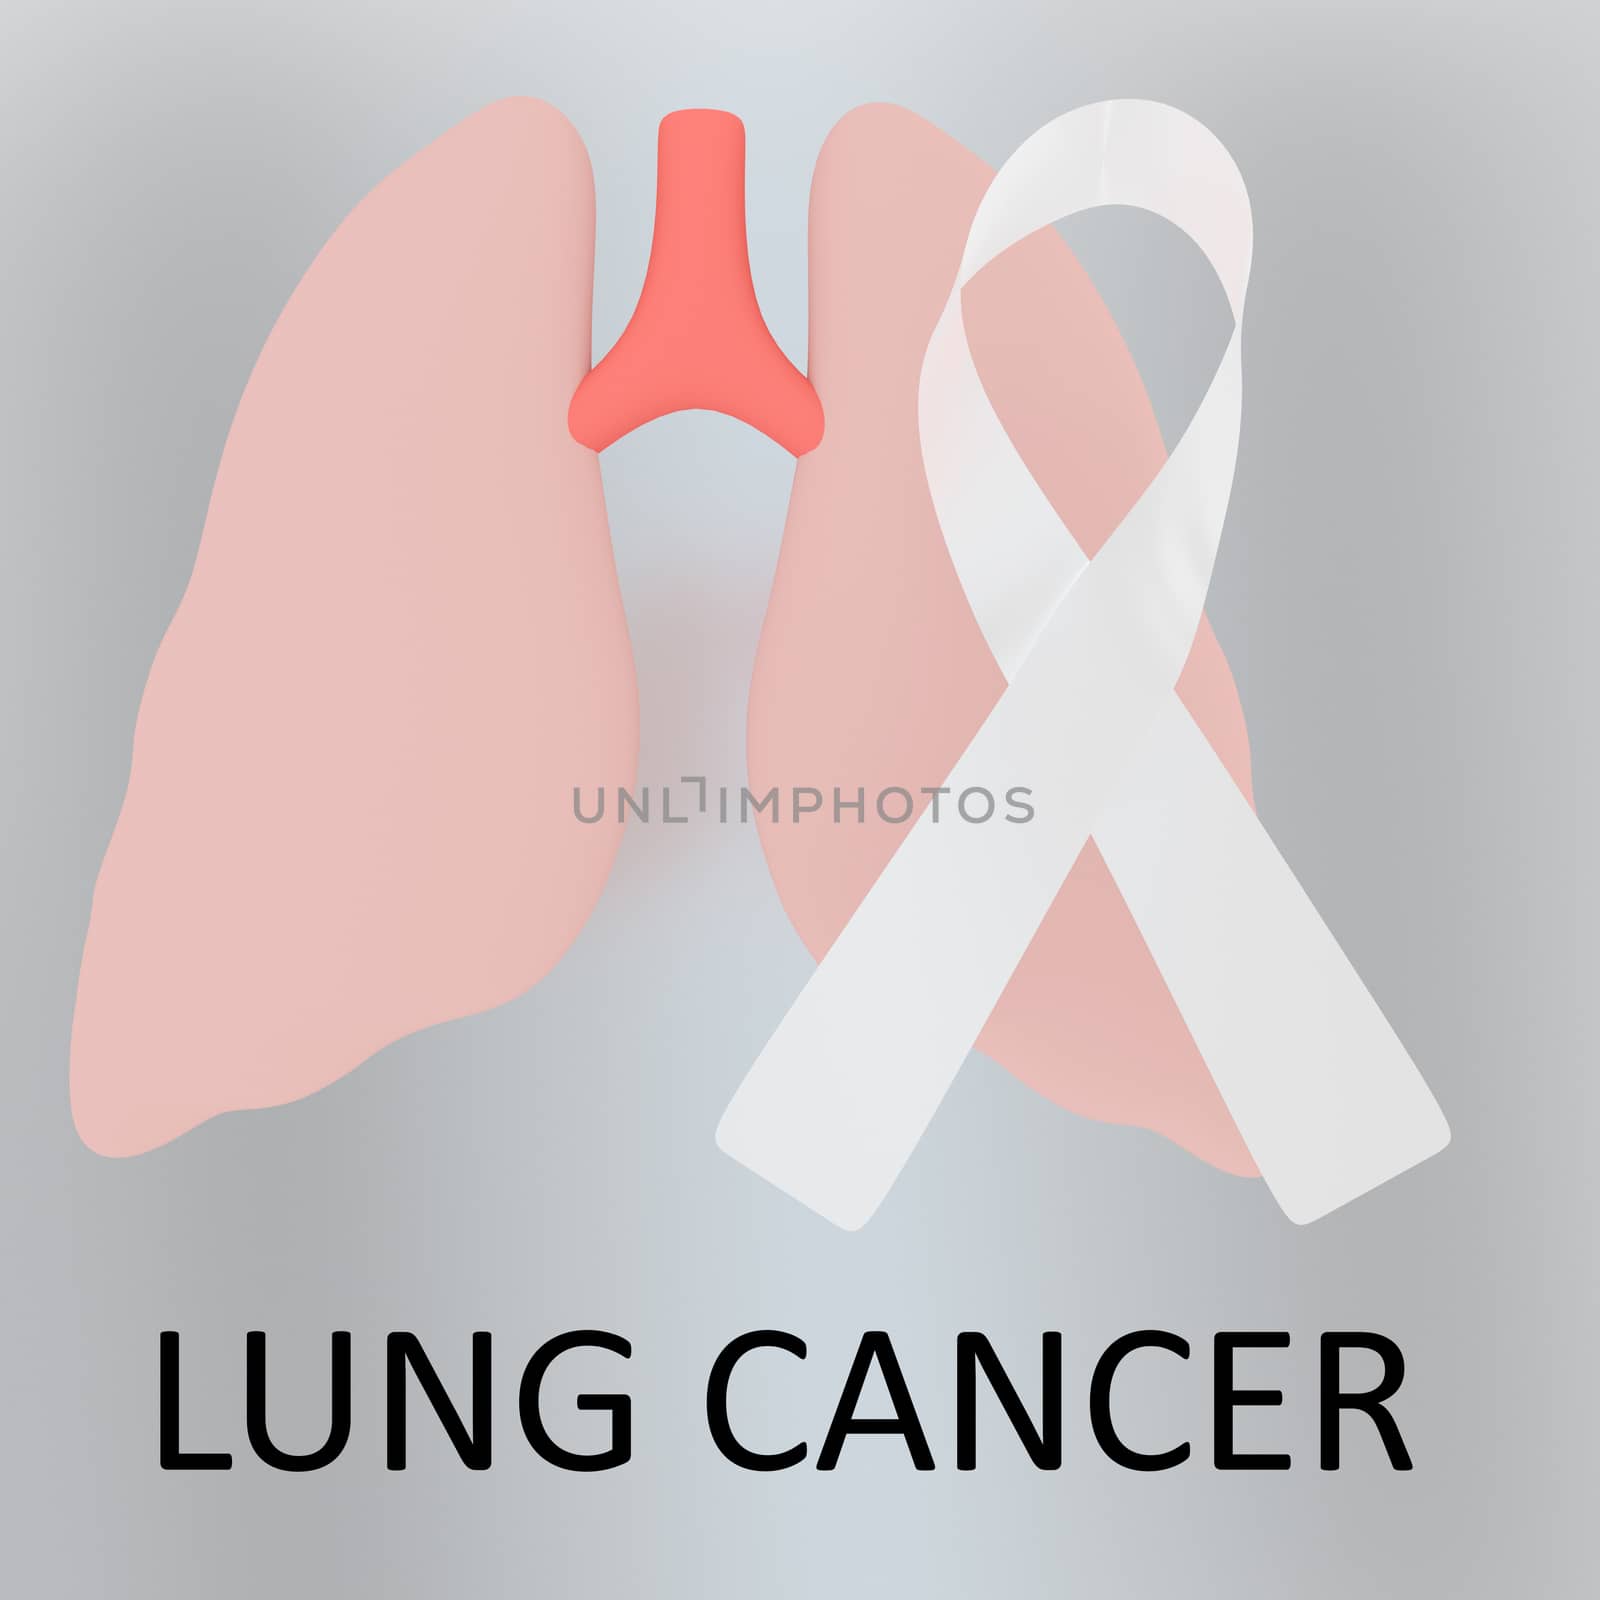 LUNG CANCER concept by HD_premium_shots